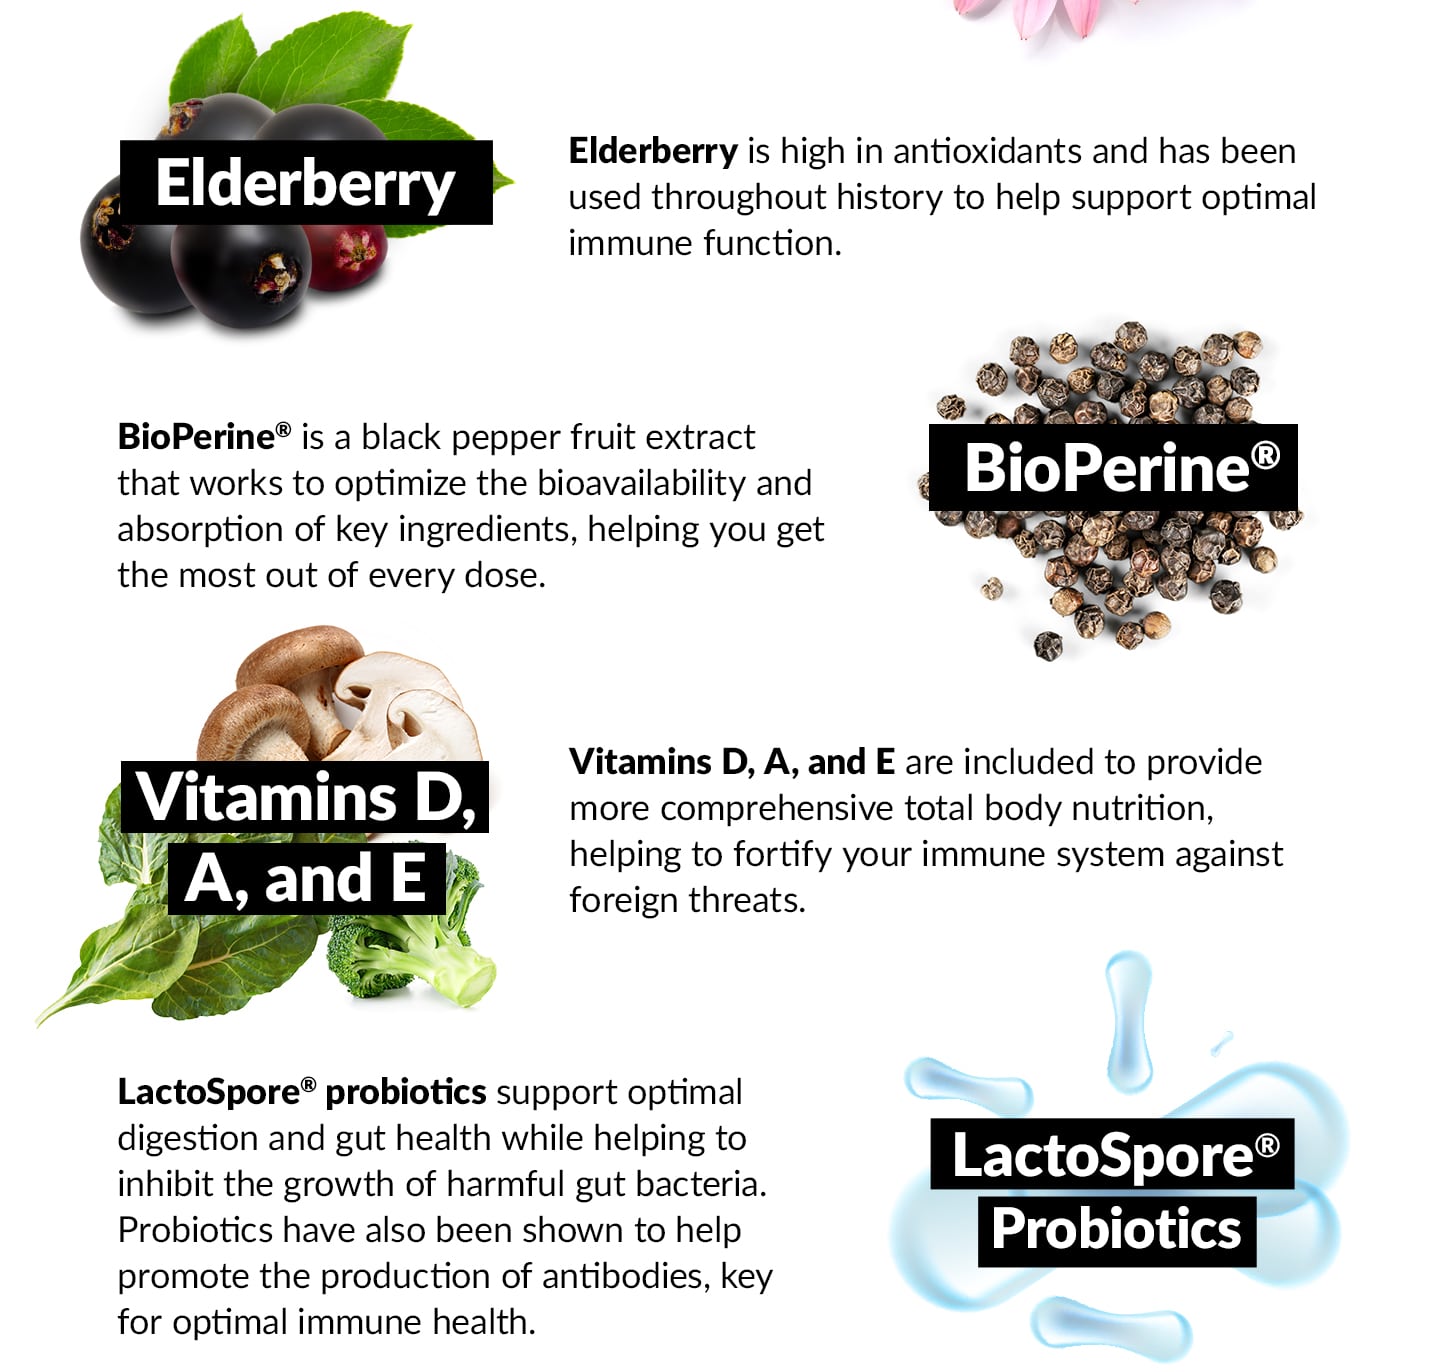 Elderberry is high in antioxidants and has been used throughout history to help support optimal immune function. BioPerine® is a black pepper fruit extract that works to optimize the bioavailability and absorption of key ingredients, helping you get the most out of every dose. PLUS: Vitamins D, A, and E are included to provide more comprehensive total body nutrition, helping to fortify your immune system against foreign threats. LactoSpore® probiotics support optimal digestion and gut health while helping to inhibit the growth of harmful gut bacteria. Probiotics have also been shown to help promote the production of antibodies, key for optimal immune health.